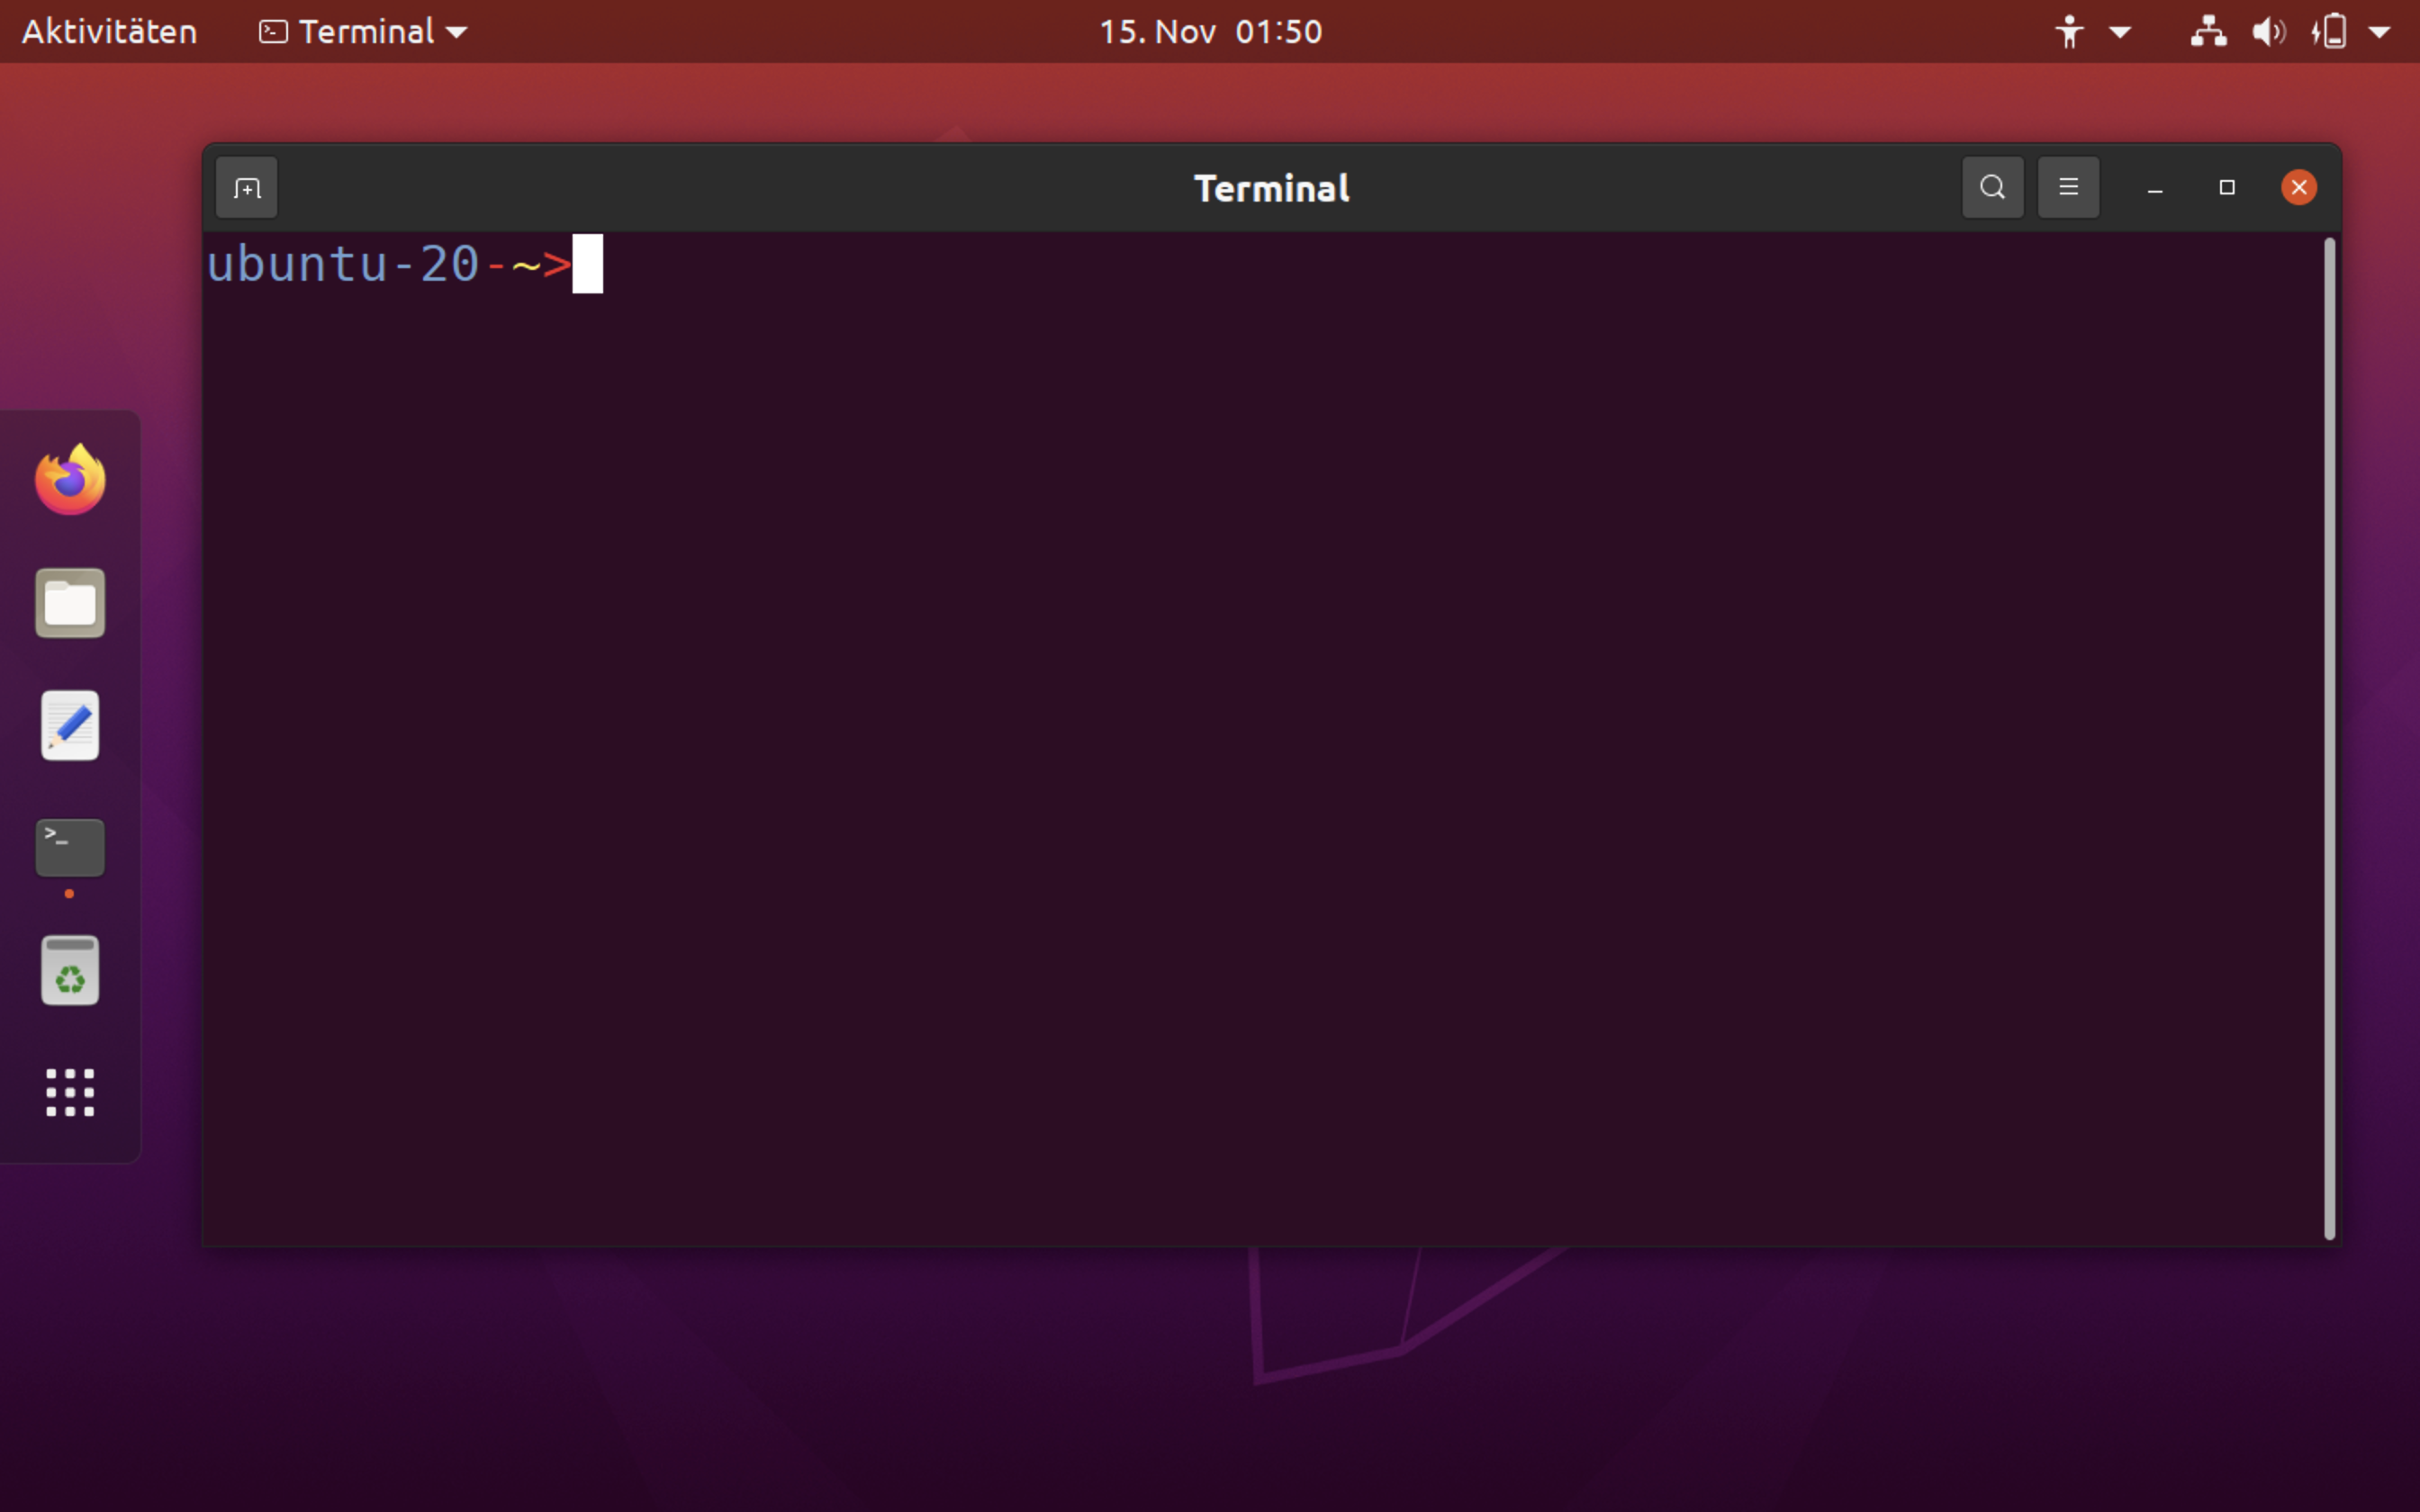 image-open-terminal-with-new-short-prompt